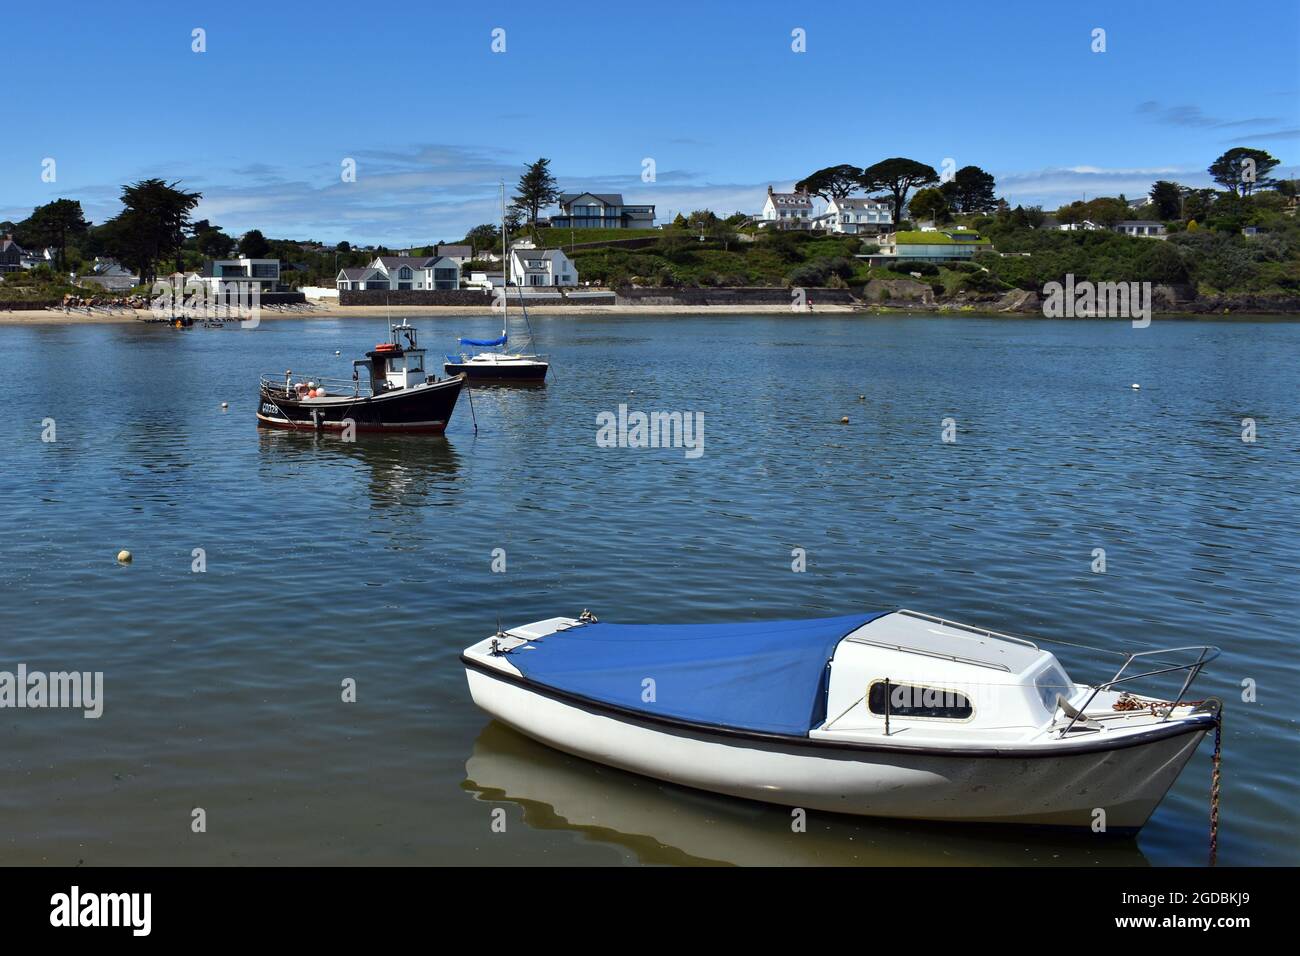 Two small boats in a quiet bay at the delightful seaside resort of Abersoch,  Wales.  A sunny summers day with blue skies.  Copy space. Stock Photo